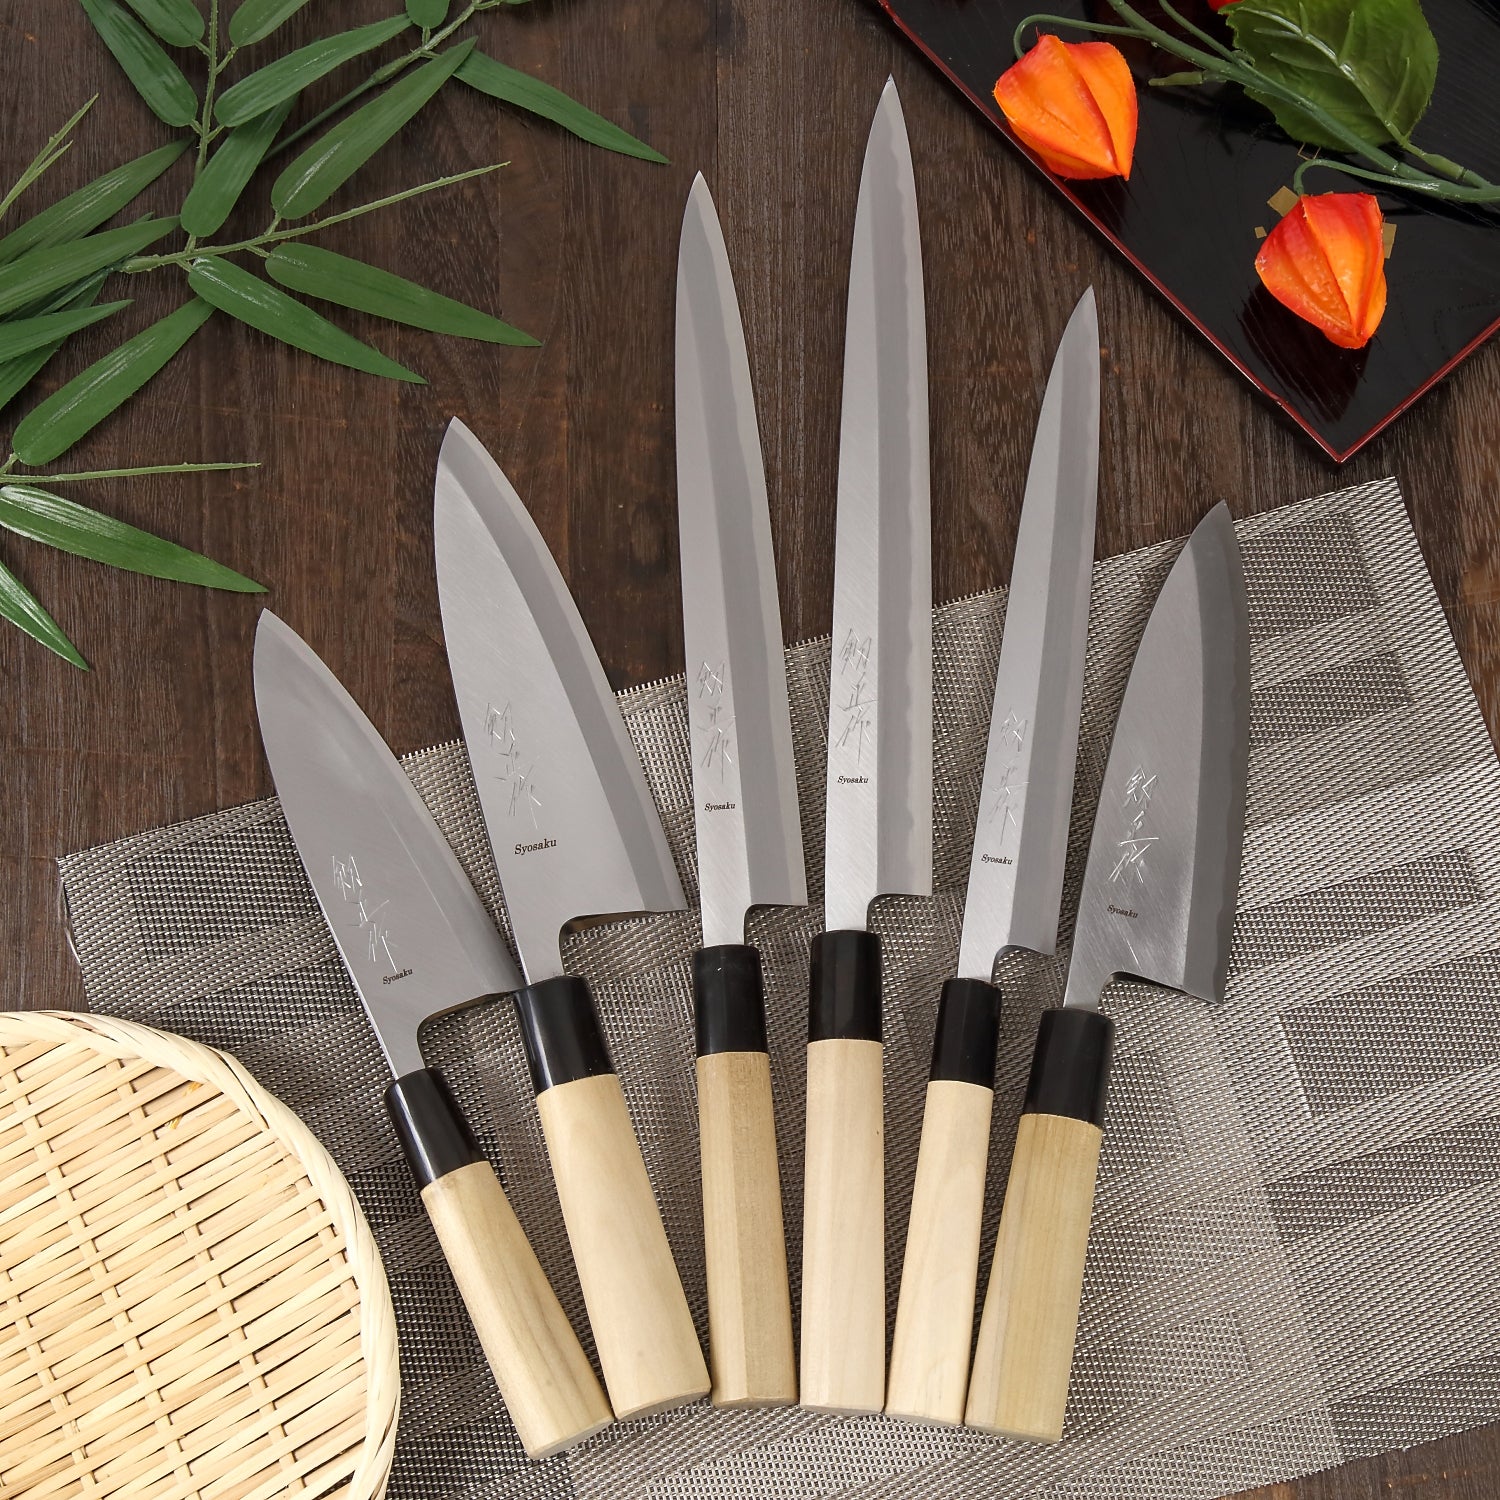 The knives I use- the best knives for kitchen, field, fish and